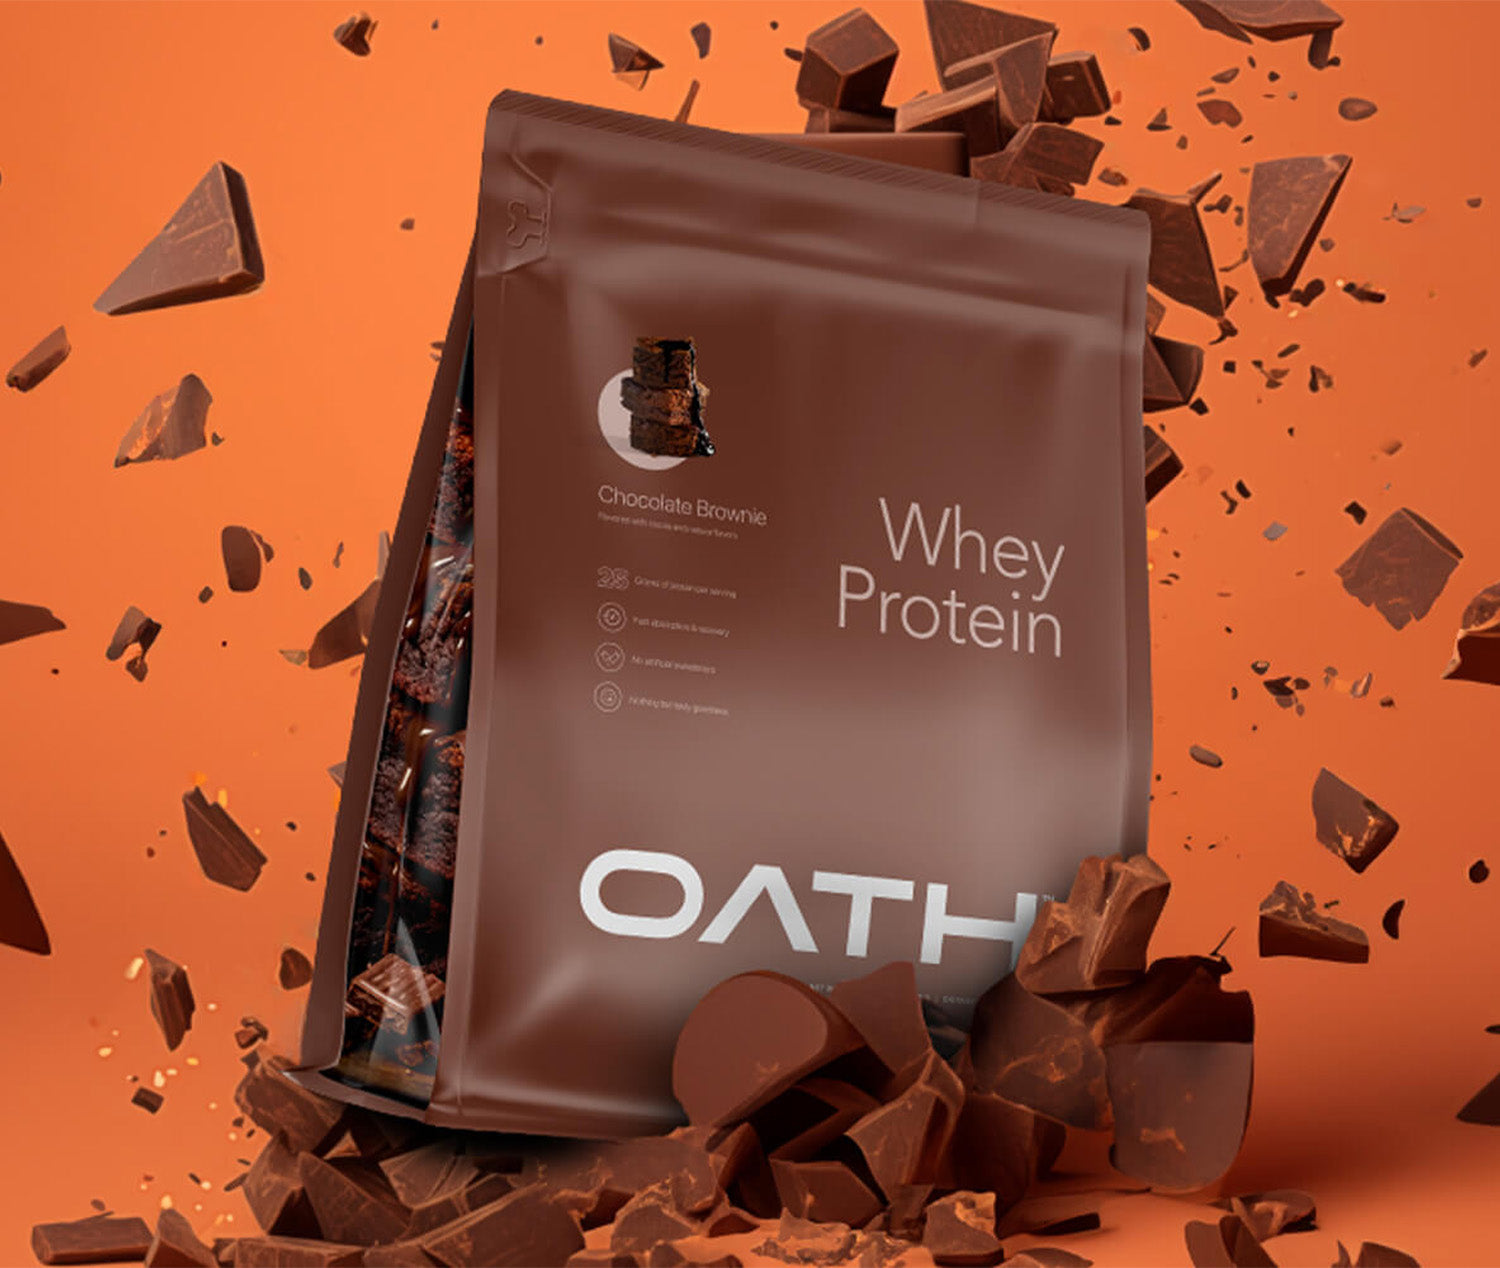 Oath Chocolate Brownie Whey Protein bag with bits of chocolate all around it